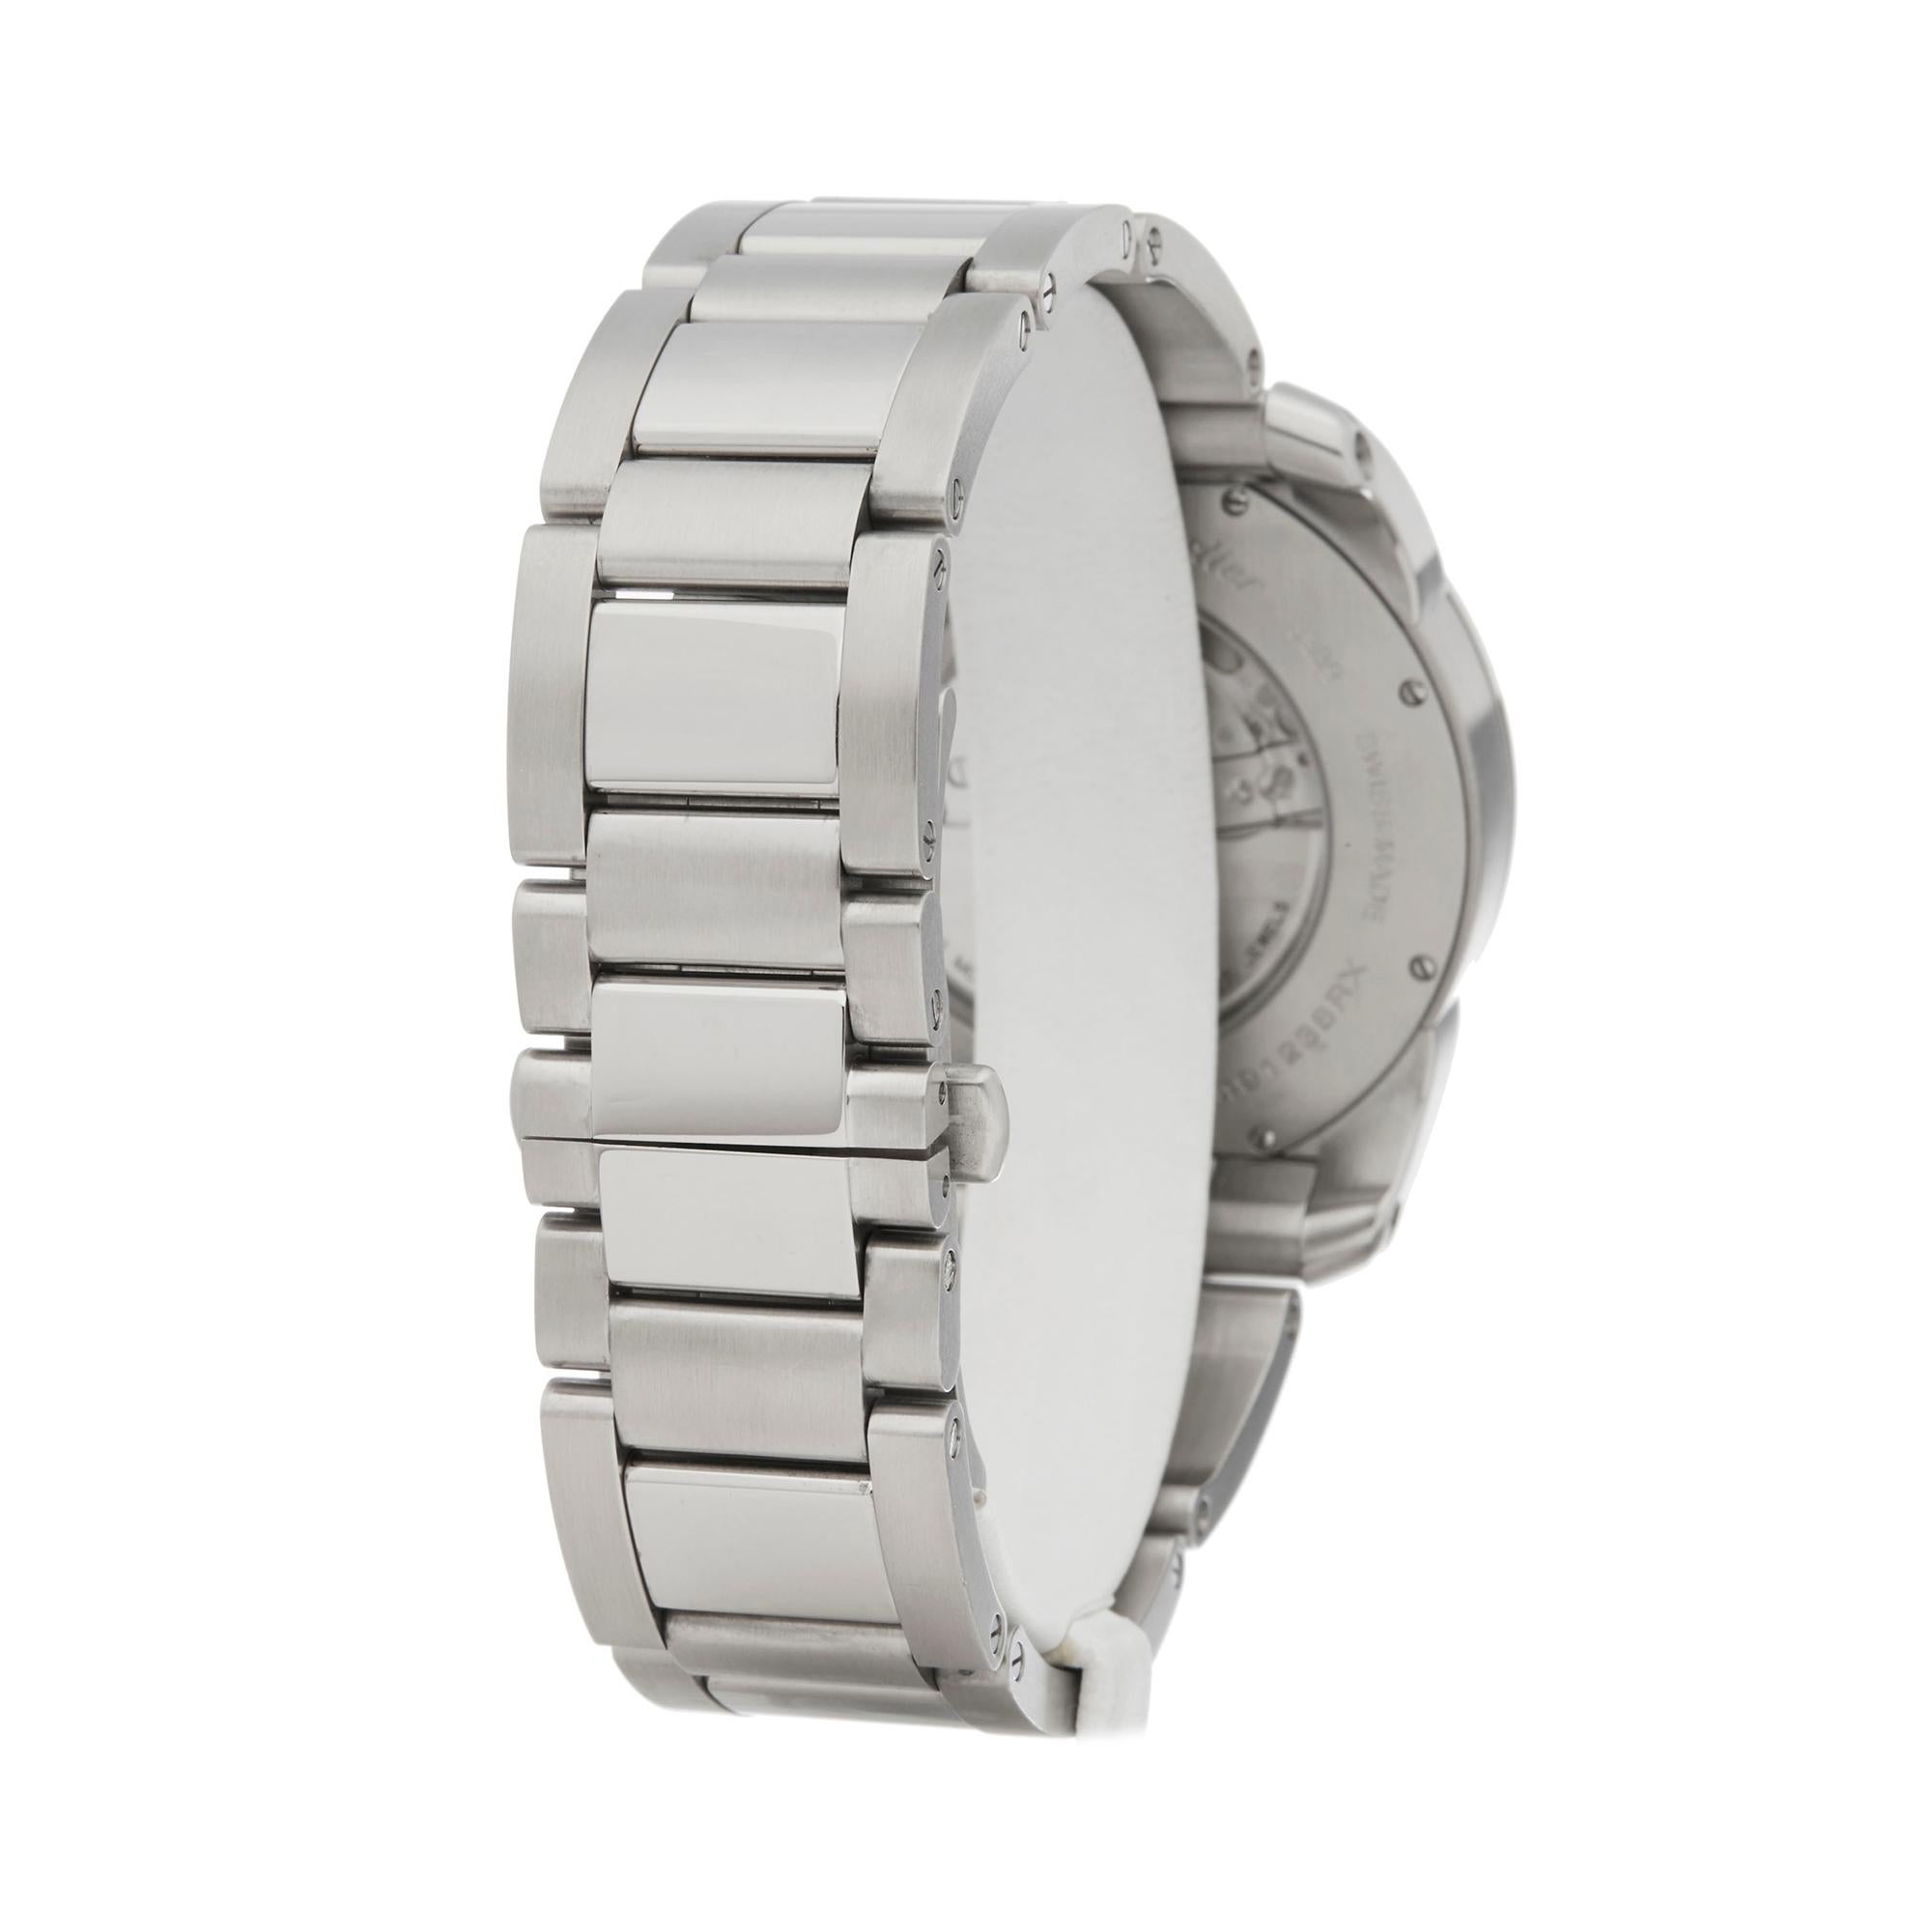 Cartier Calibre Stainless Steel W7100037 or 3398 1